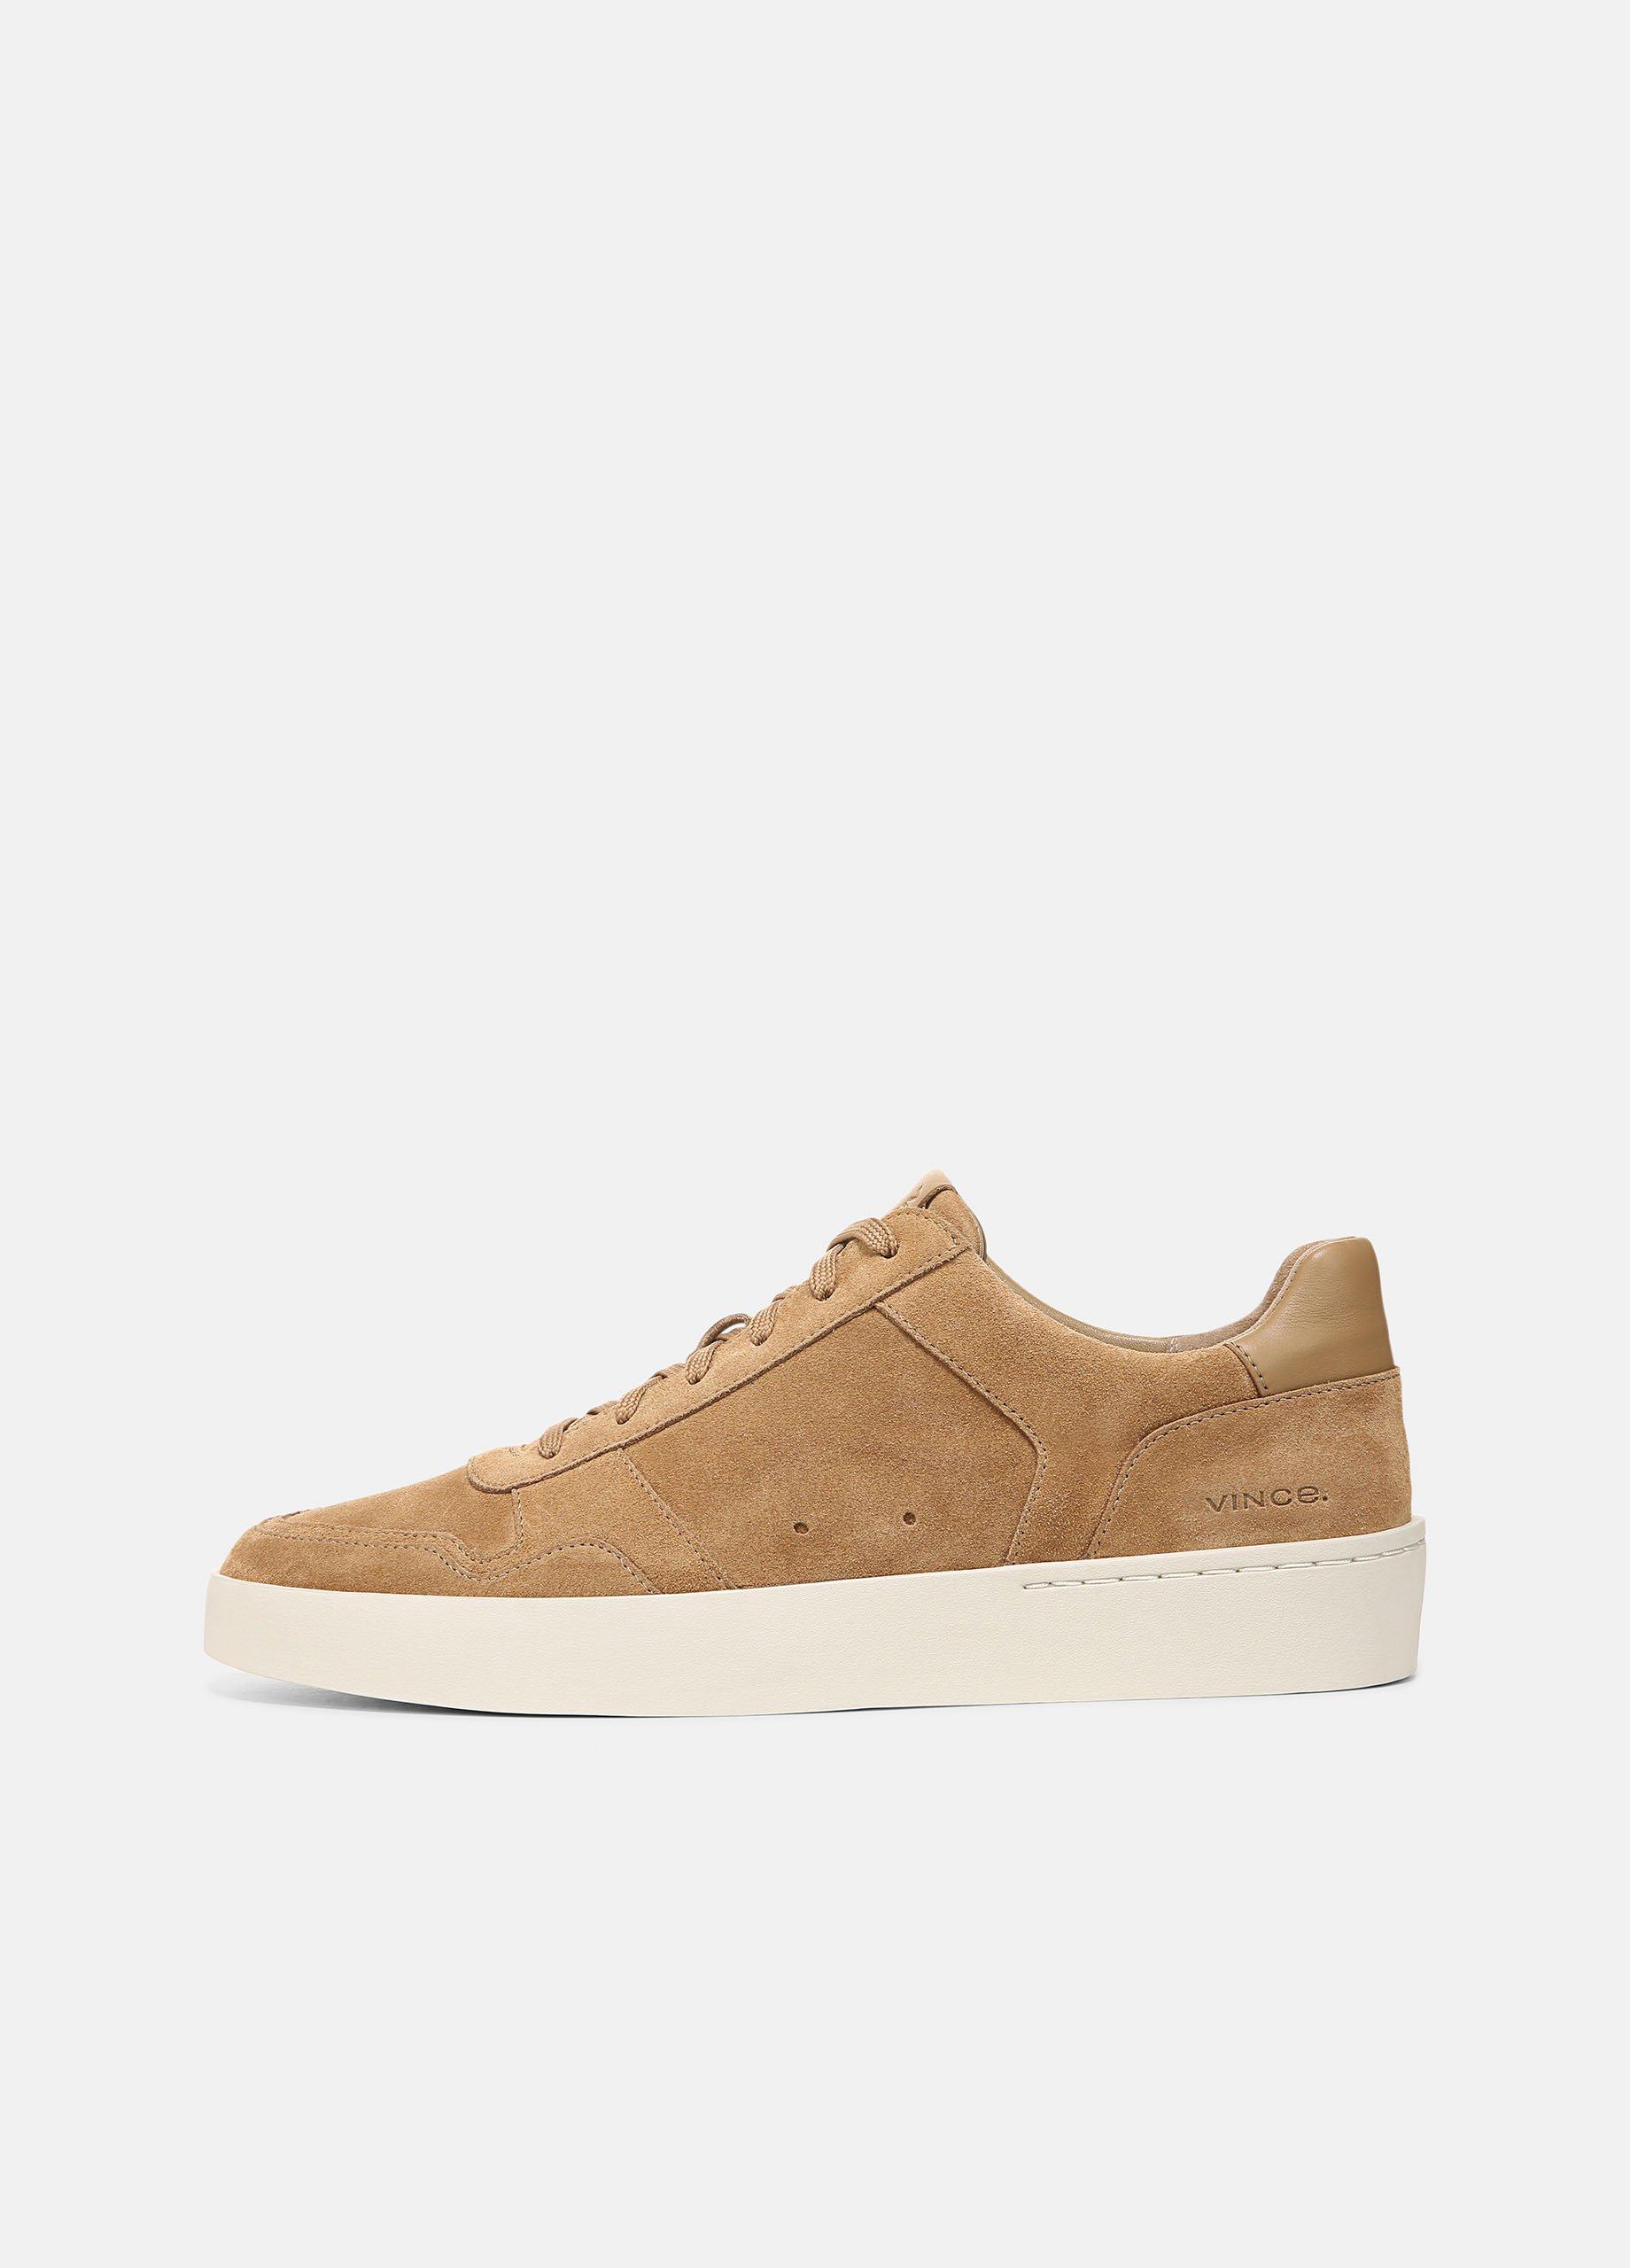 Peyton Leather Lace-Up Sneaker, New Camel, Size 12 Vince